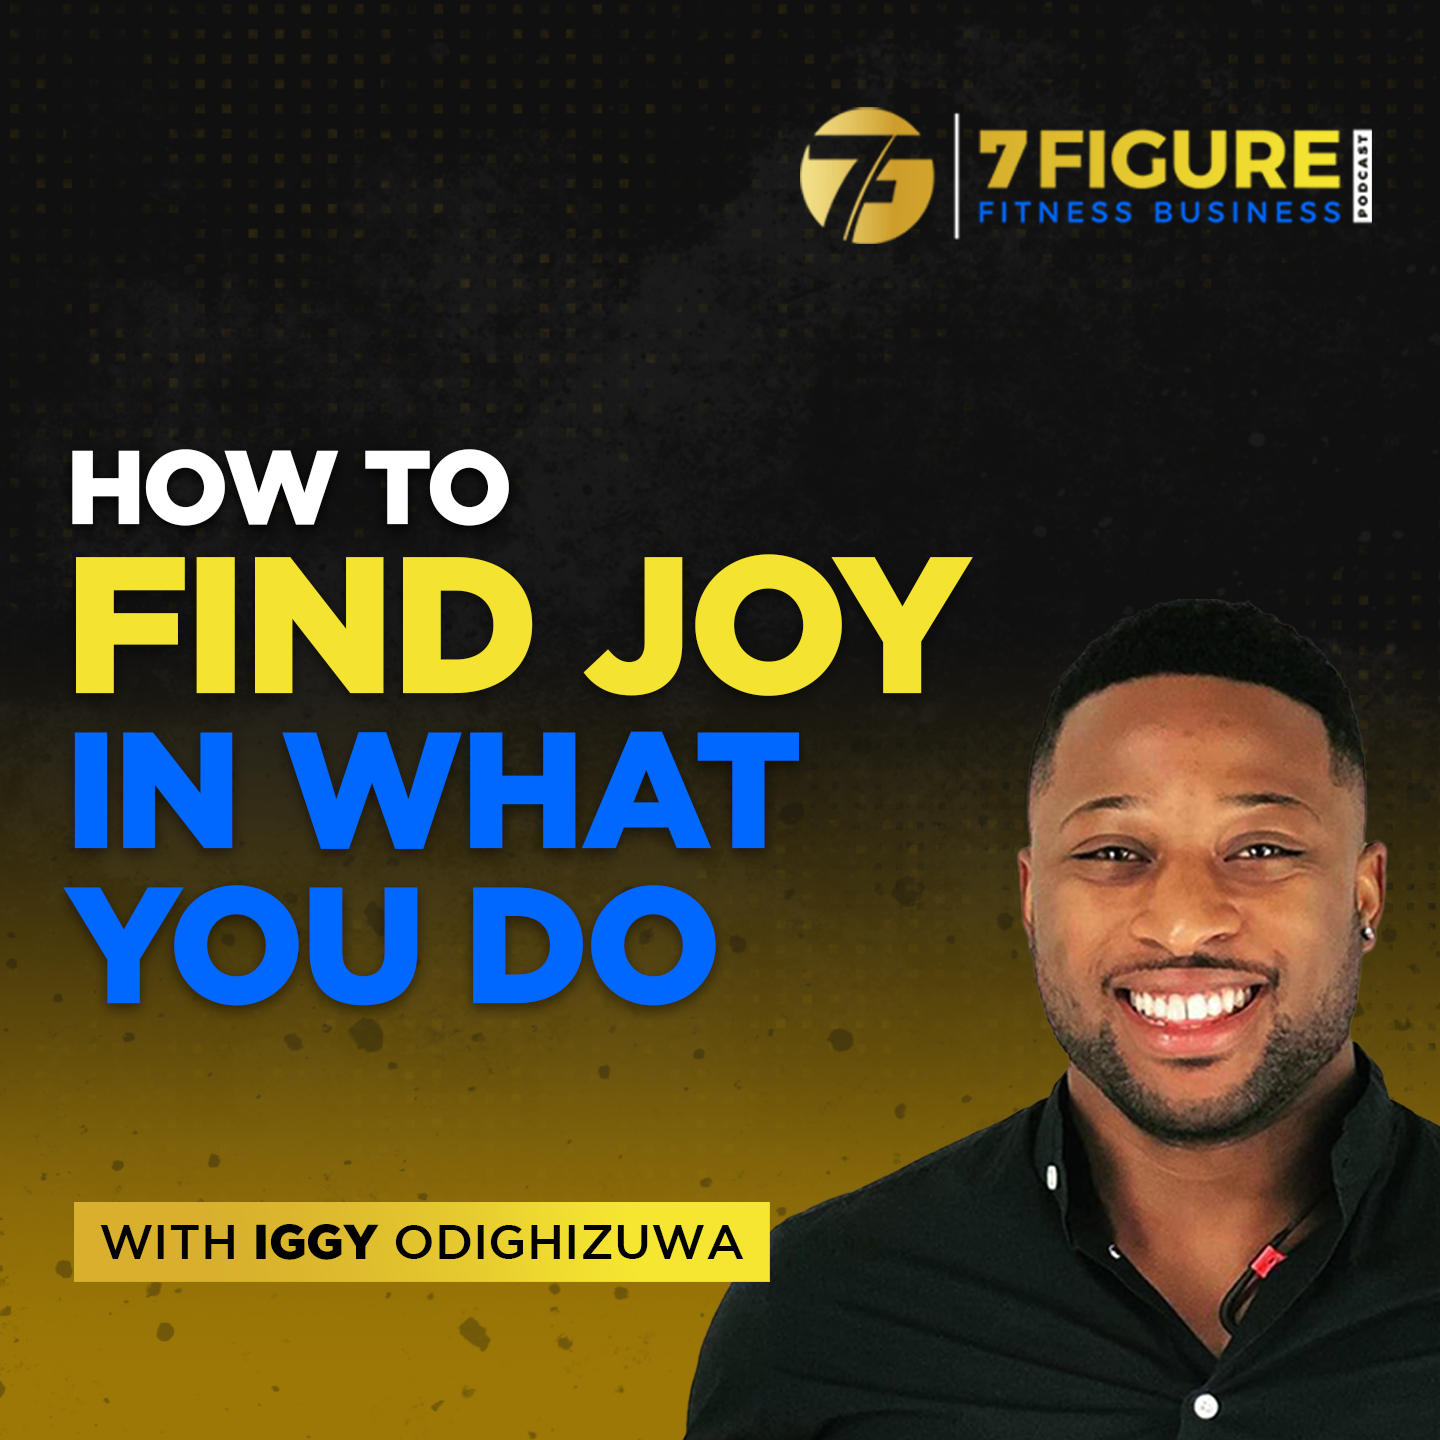 How to Find Joy in What You Do?